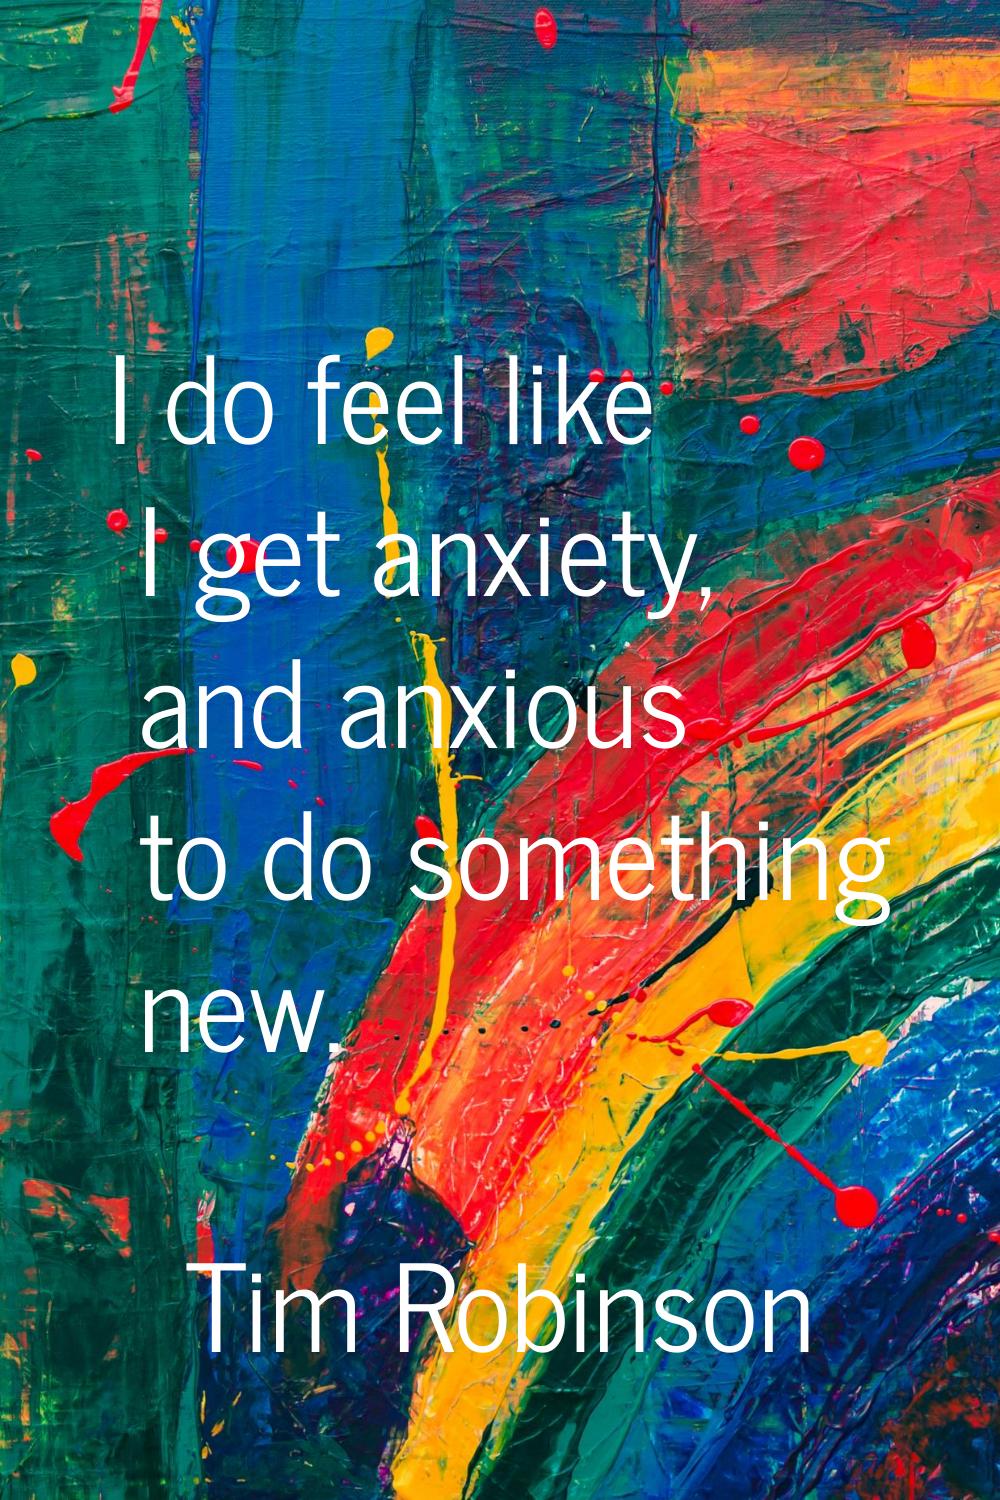 I do feel like I get anxiety, and anxious to do something new.